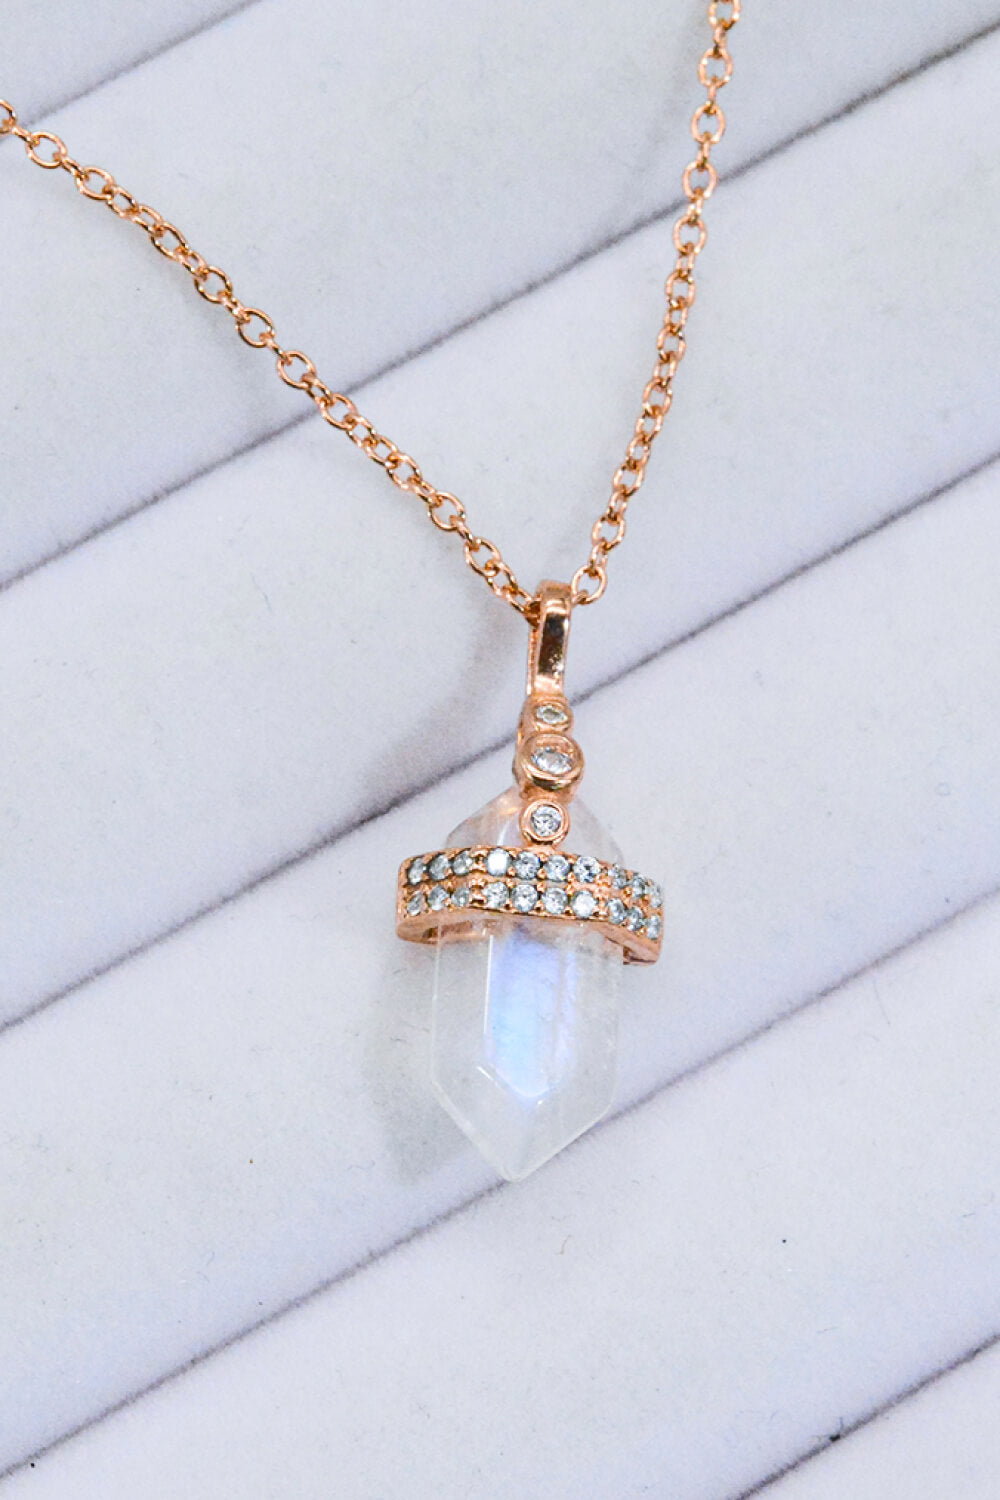 925 Sterling Silver Moonstone Pendant Necklace - Cheeky Chic Boutique